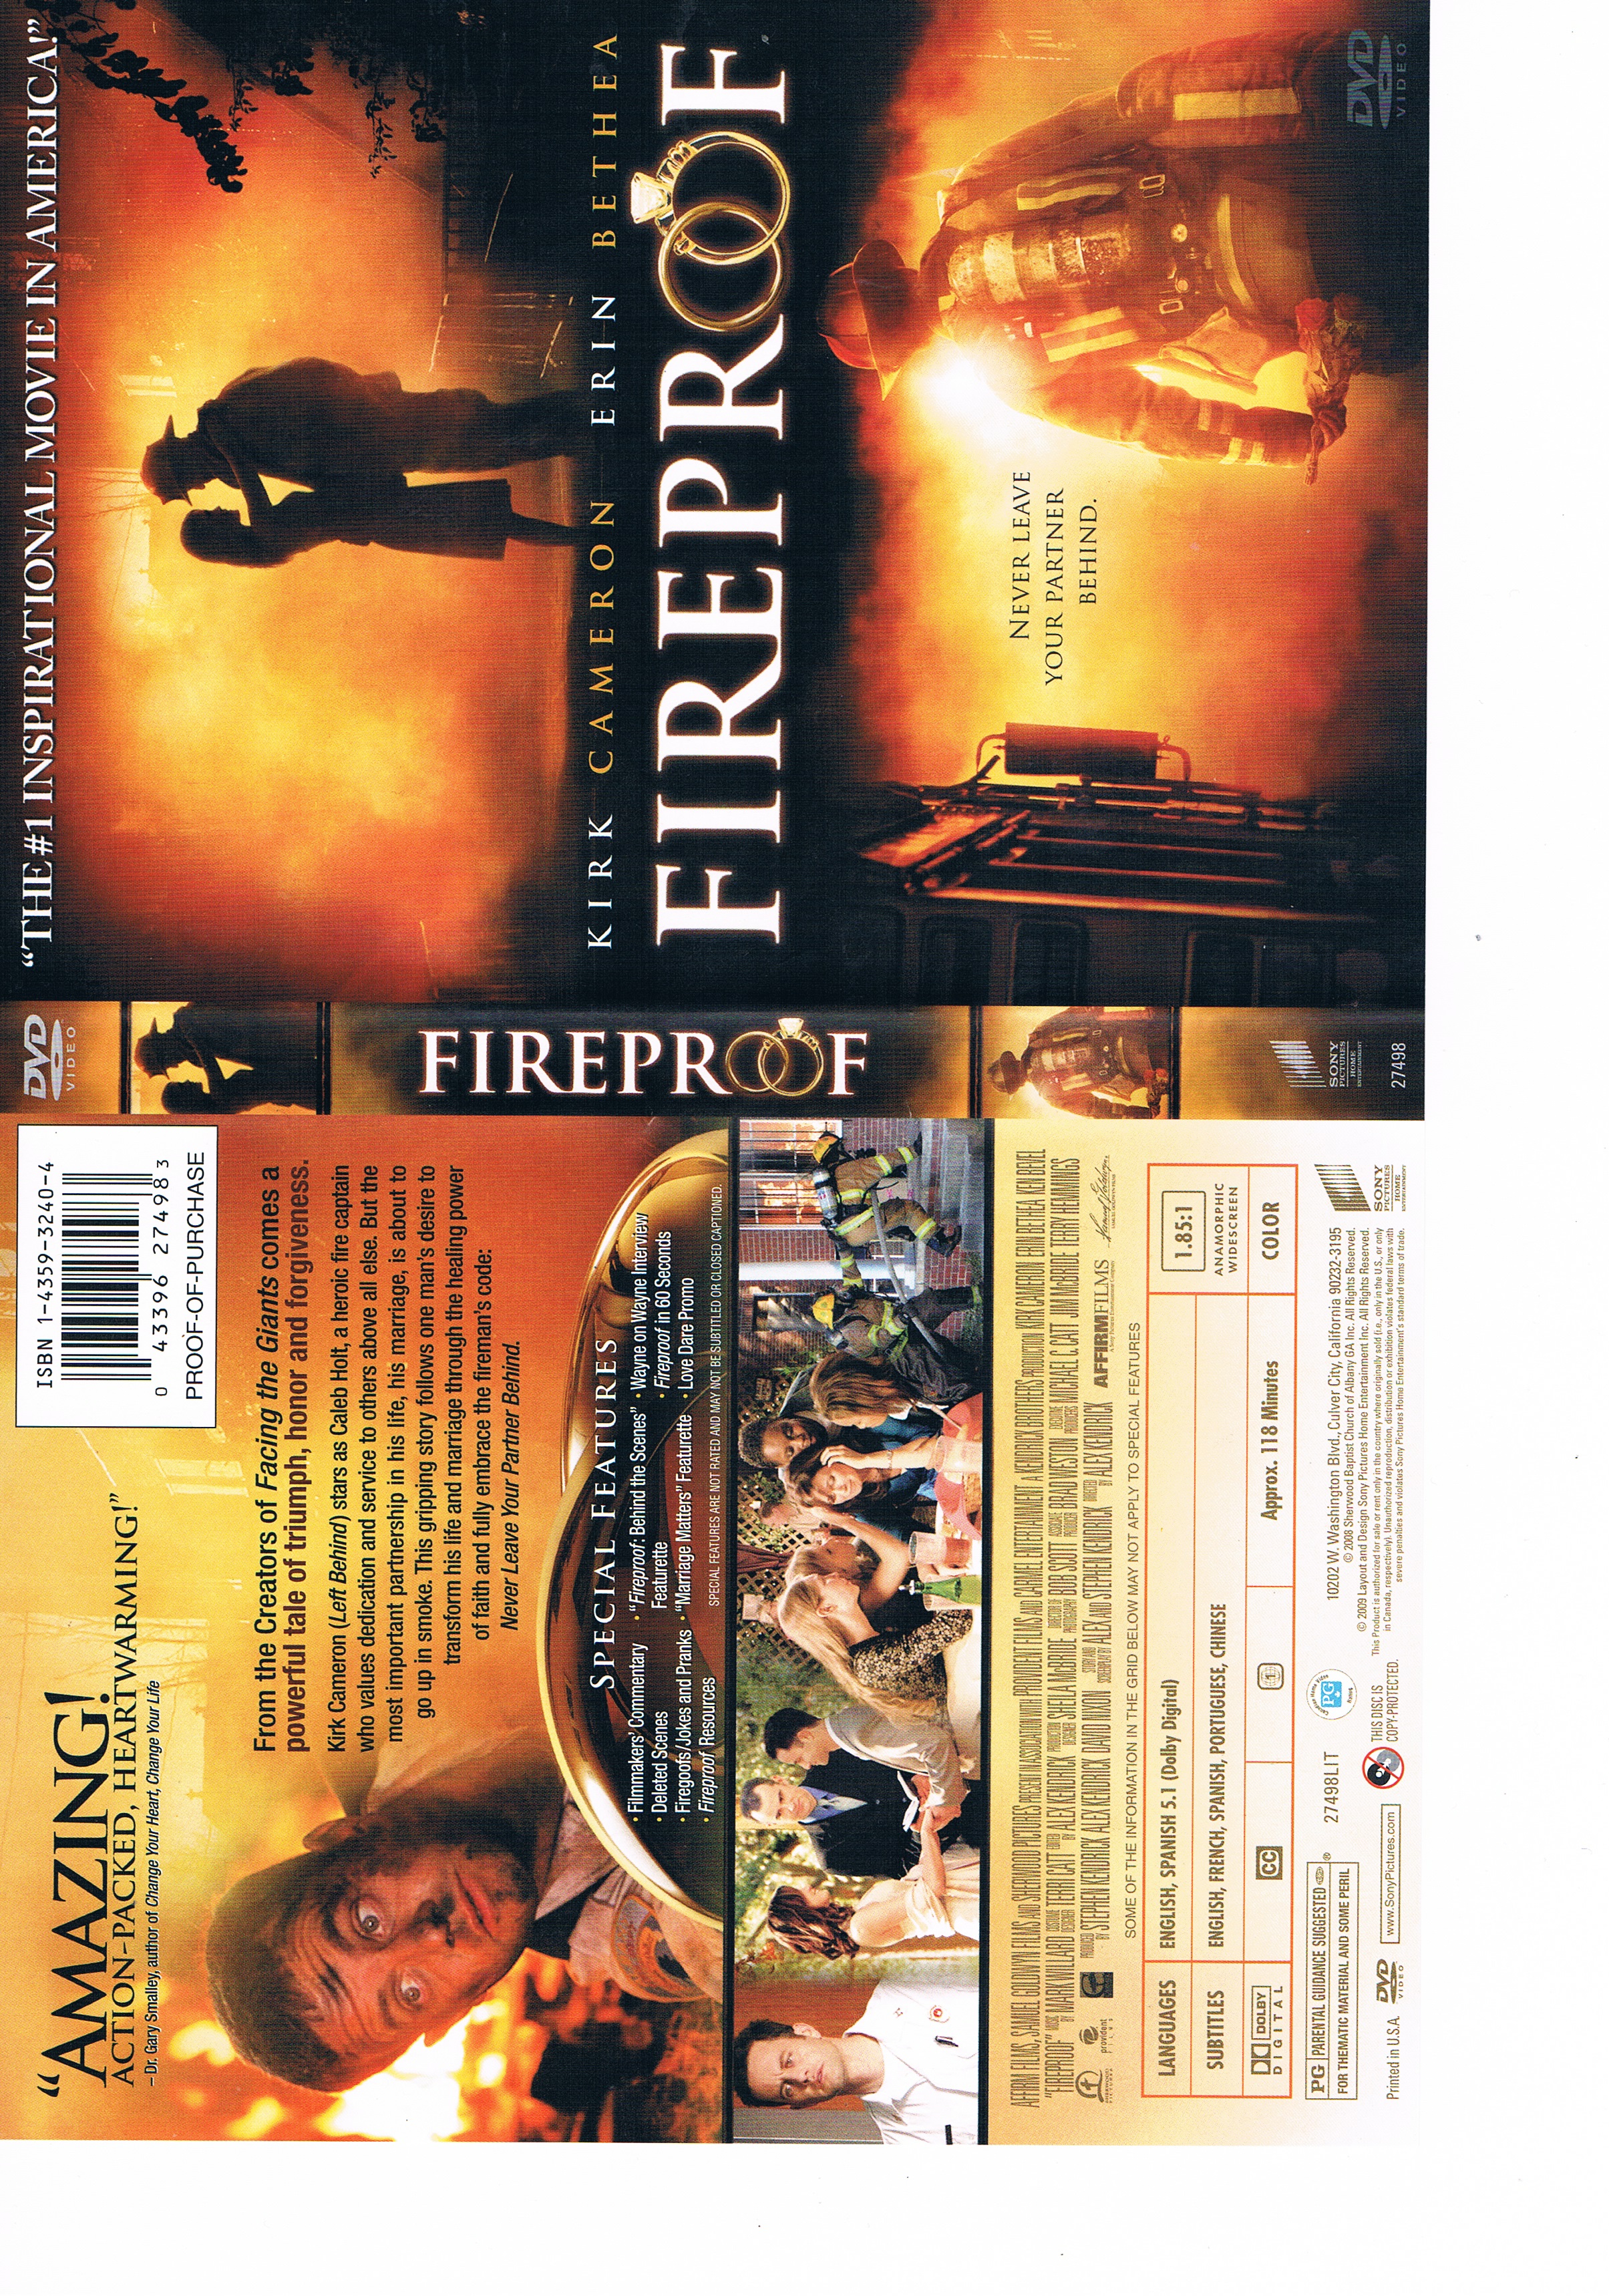 Jaquette DVD Fireproof Zone 1